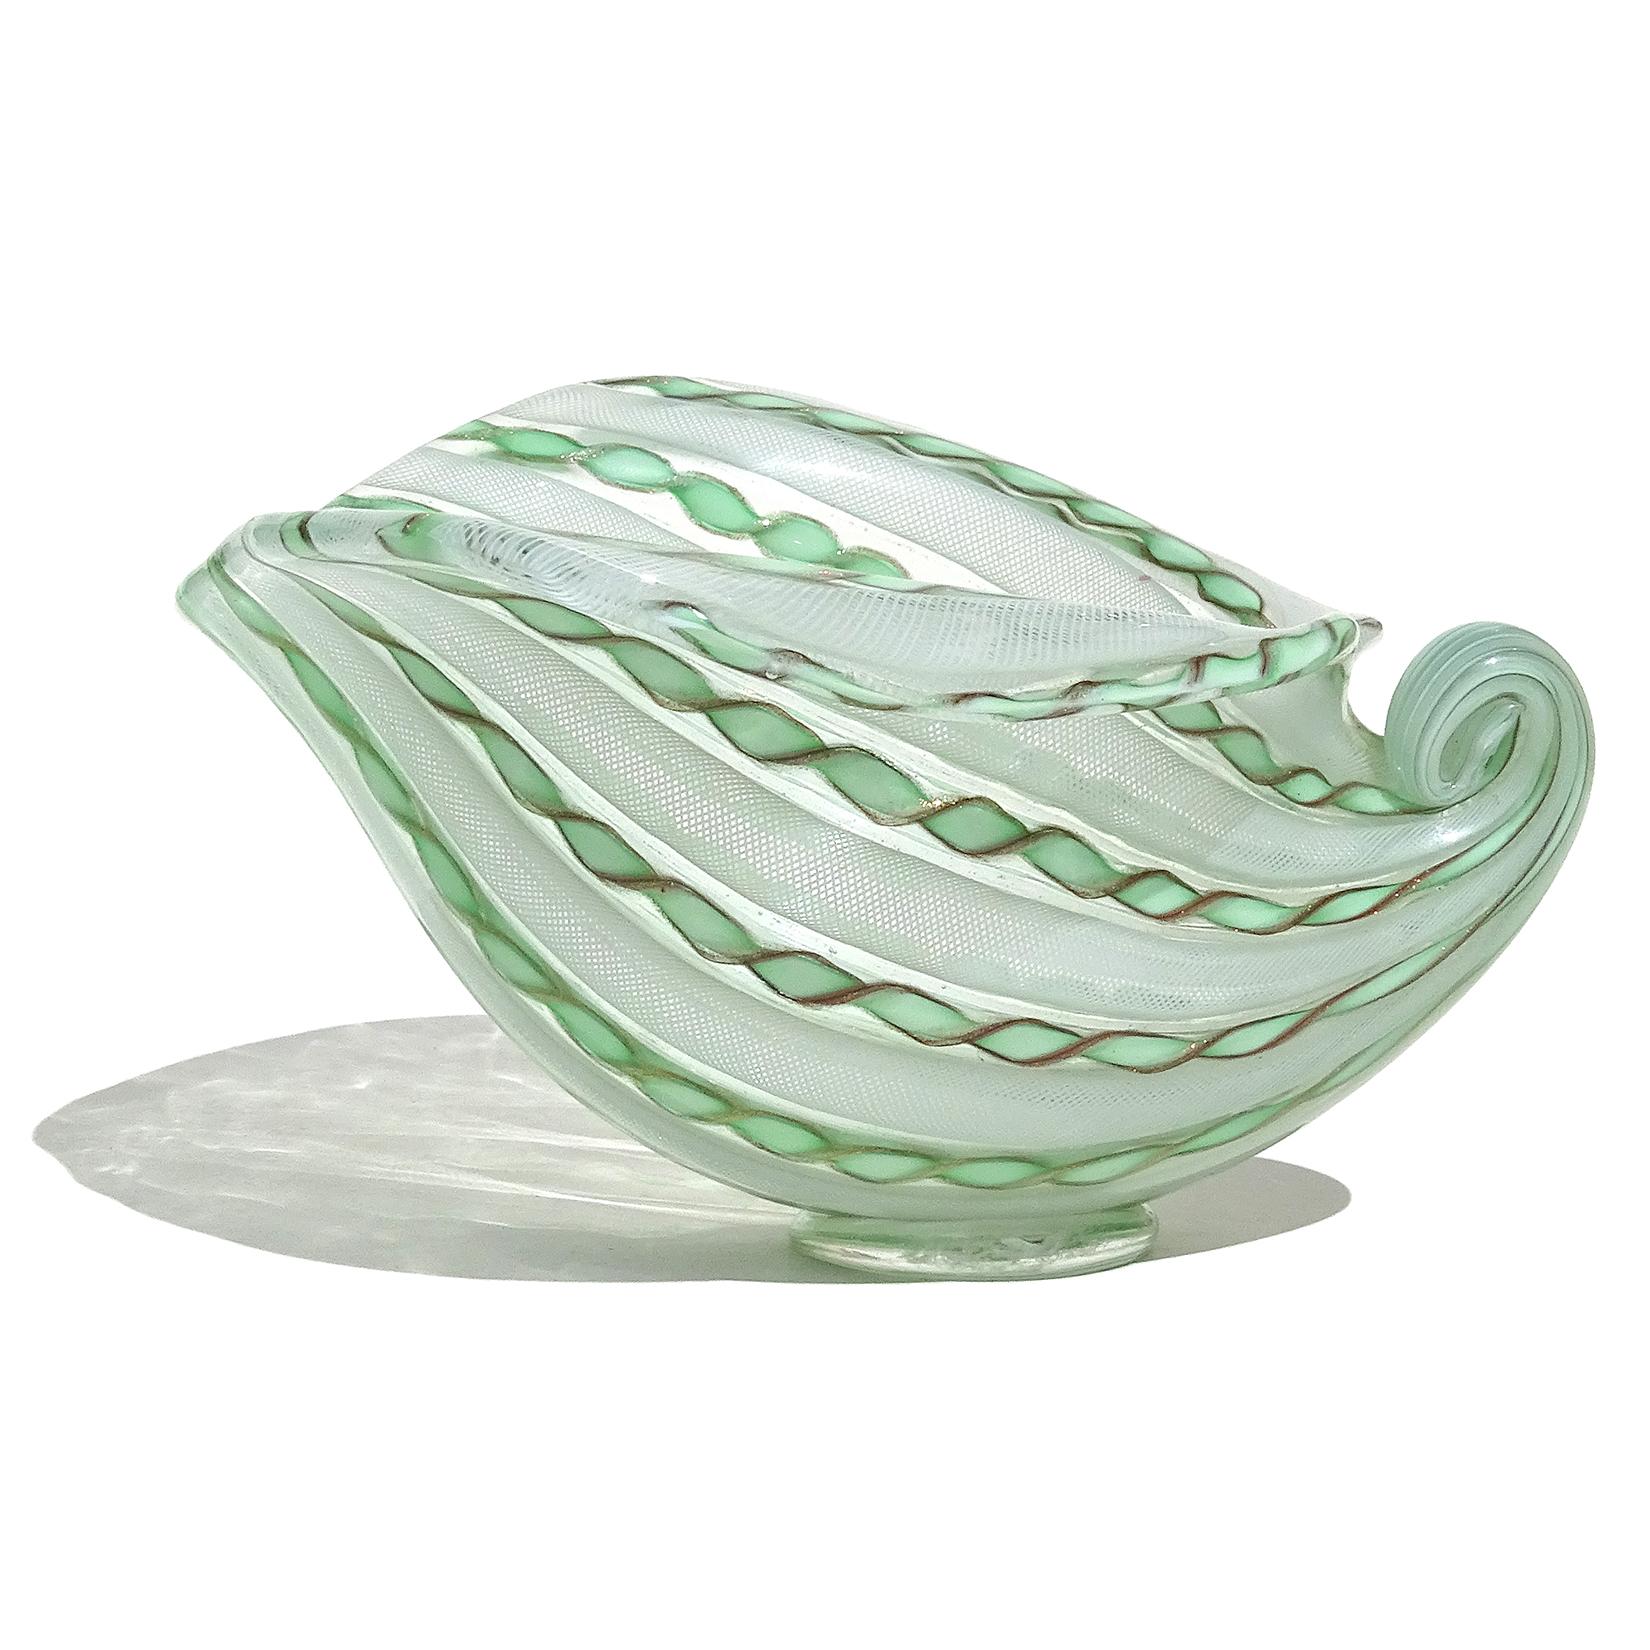 Beautiful vintage Murano hand blown white and green ribbons Italian art glass seashell shaped bowl. Attributed to designer Dino Martens for Aureliano Toso, circa 1950s. The shell has an alternating stripe pattern, with tight white net Zanfirico and